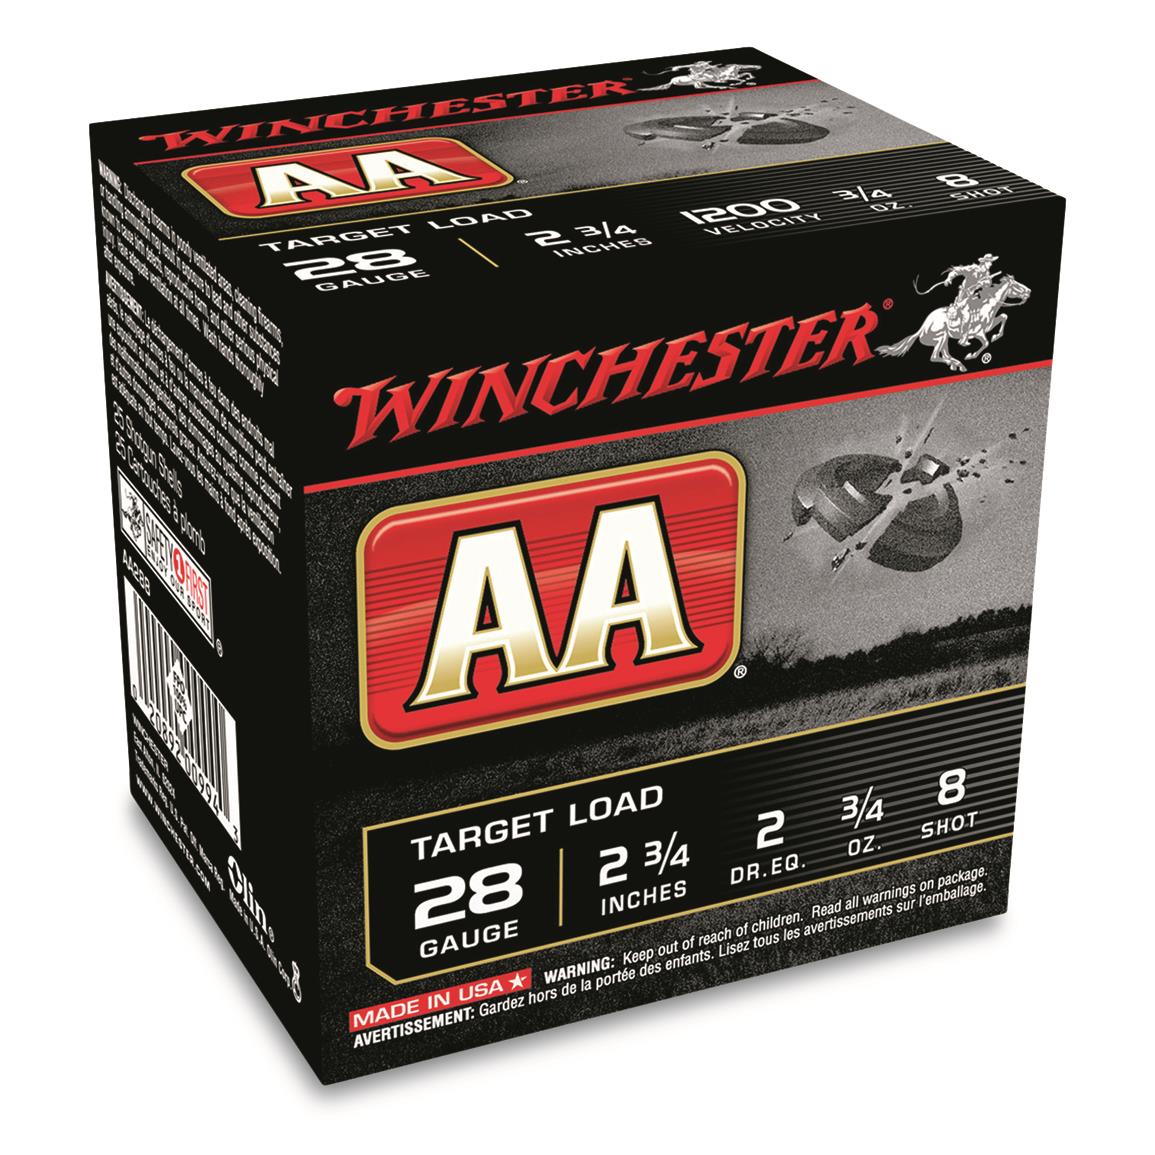 Winchester AA Target Load, 28 Gauge, 2 3/4", 3/4 oz., 250 Rounds